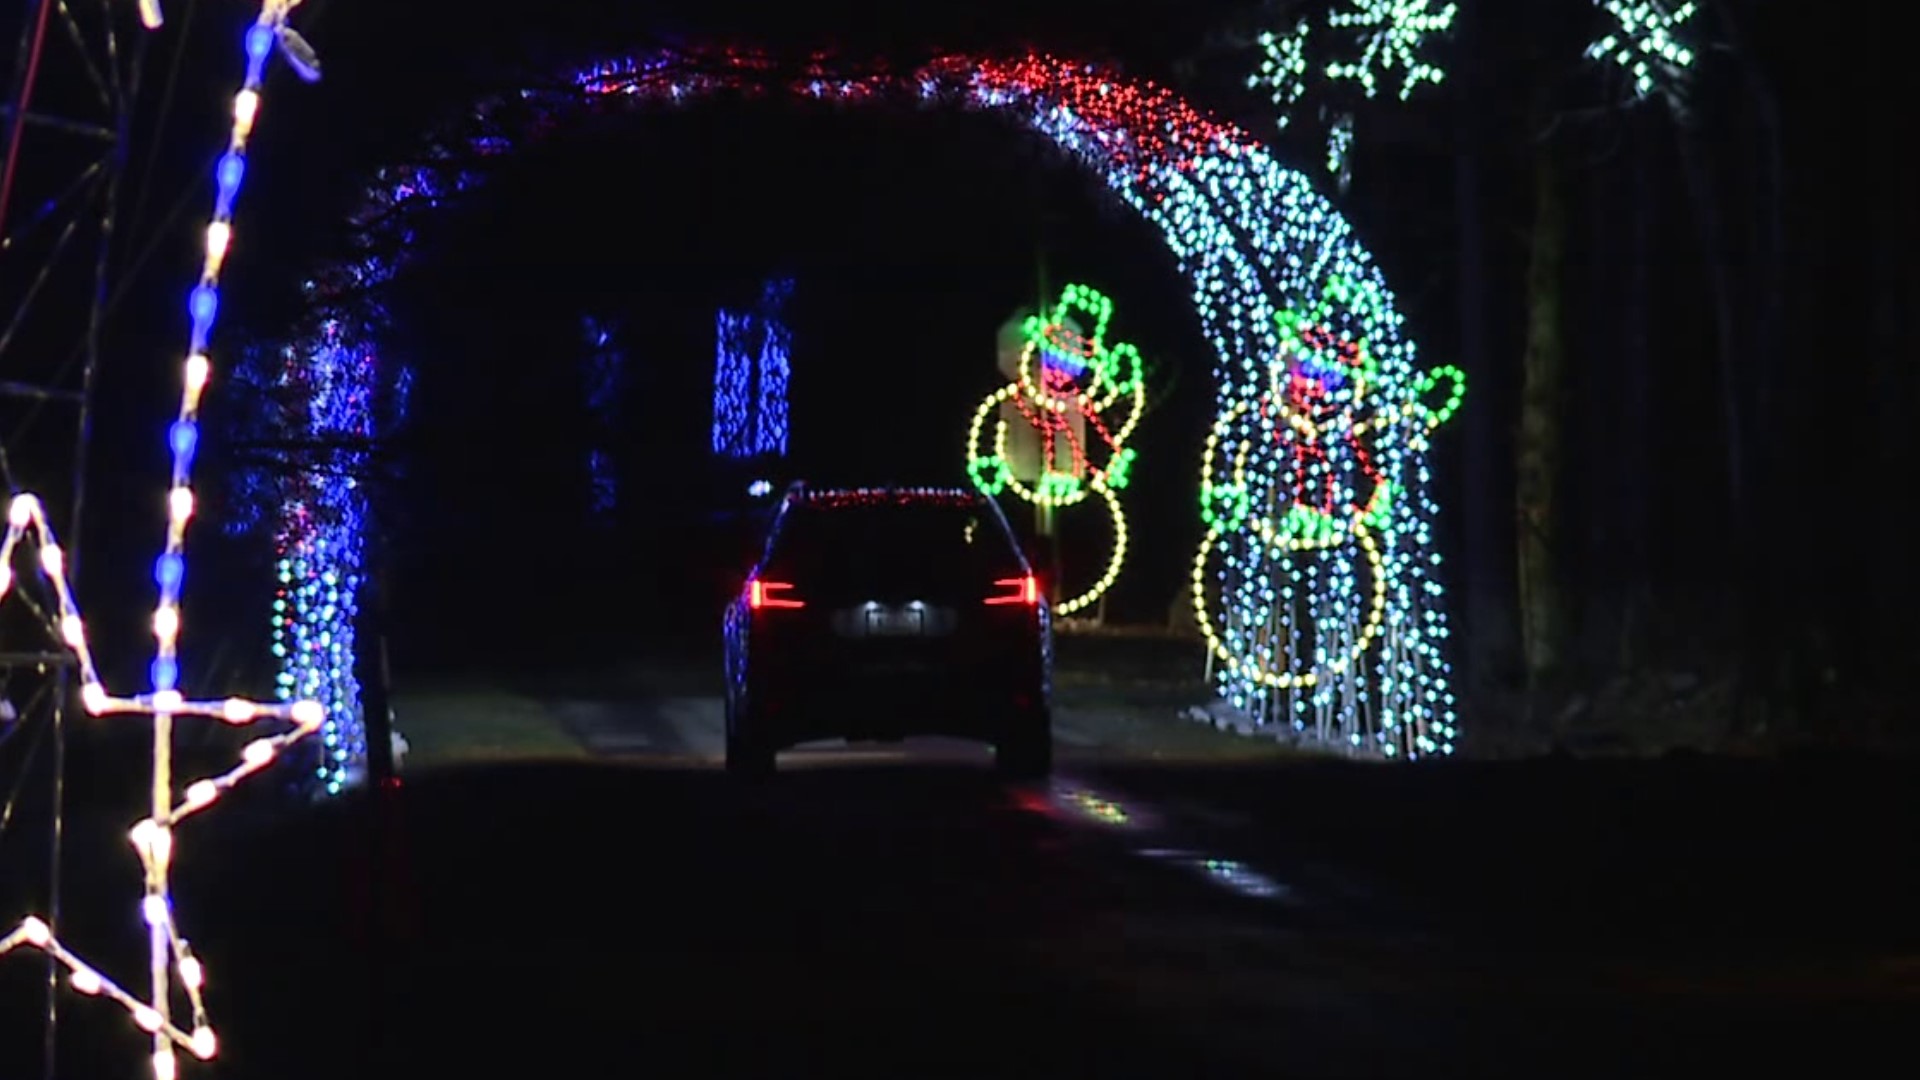 Sunday night was the final night for the drive-through holiday light display at Mauch Chunk Lake Park in Jim Thorpe.